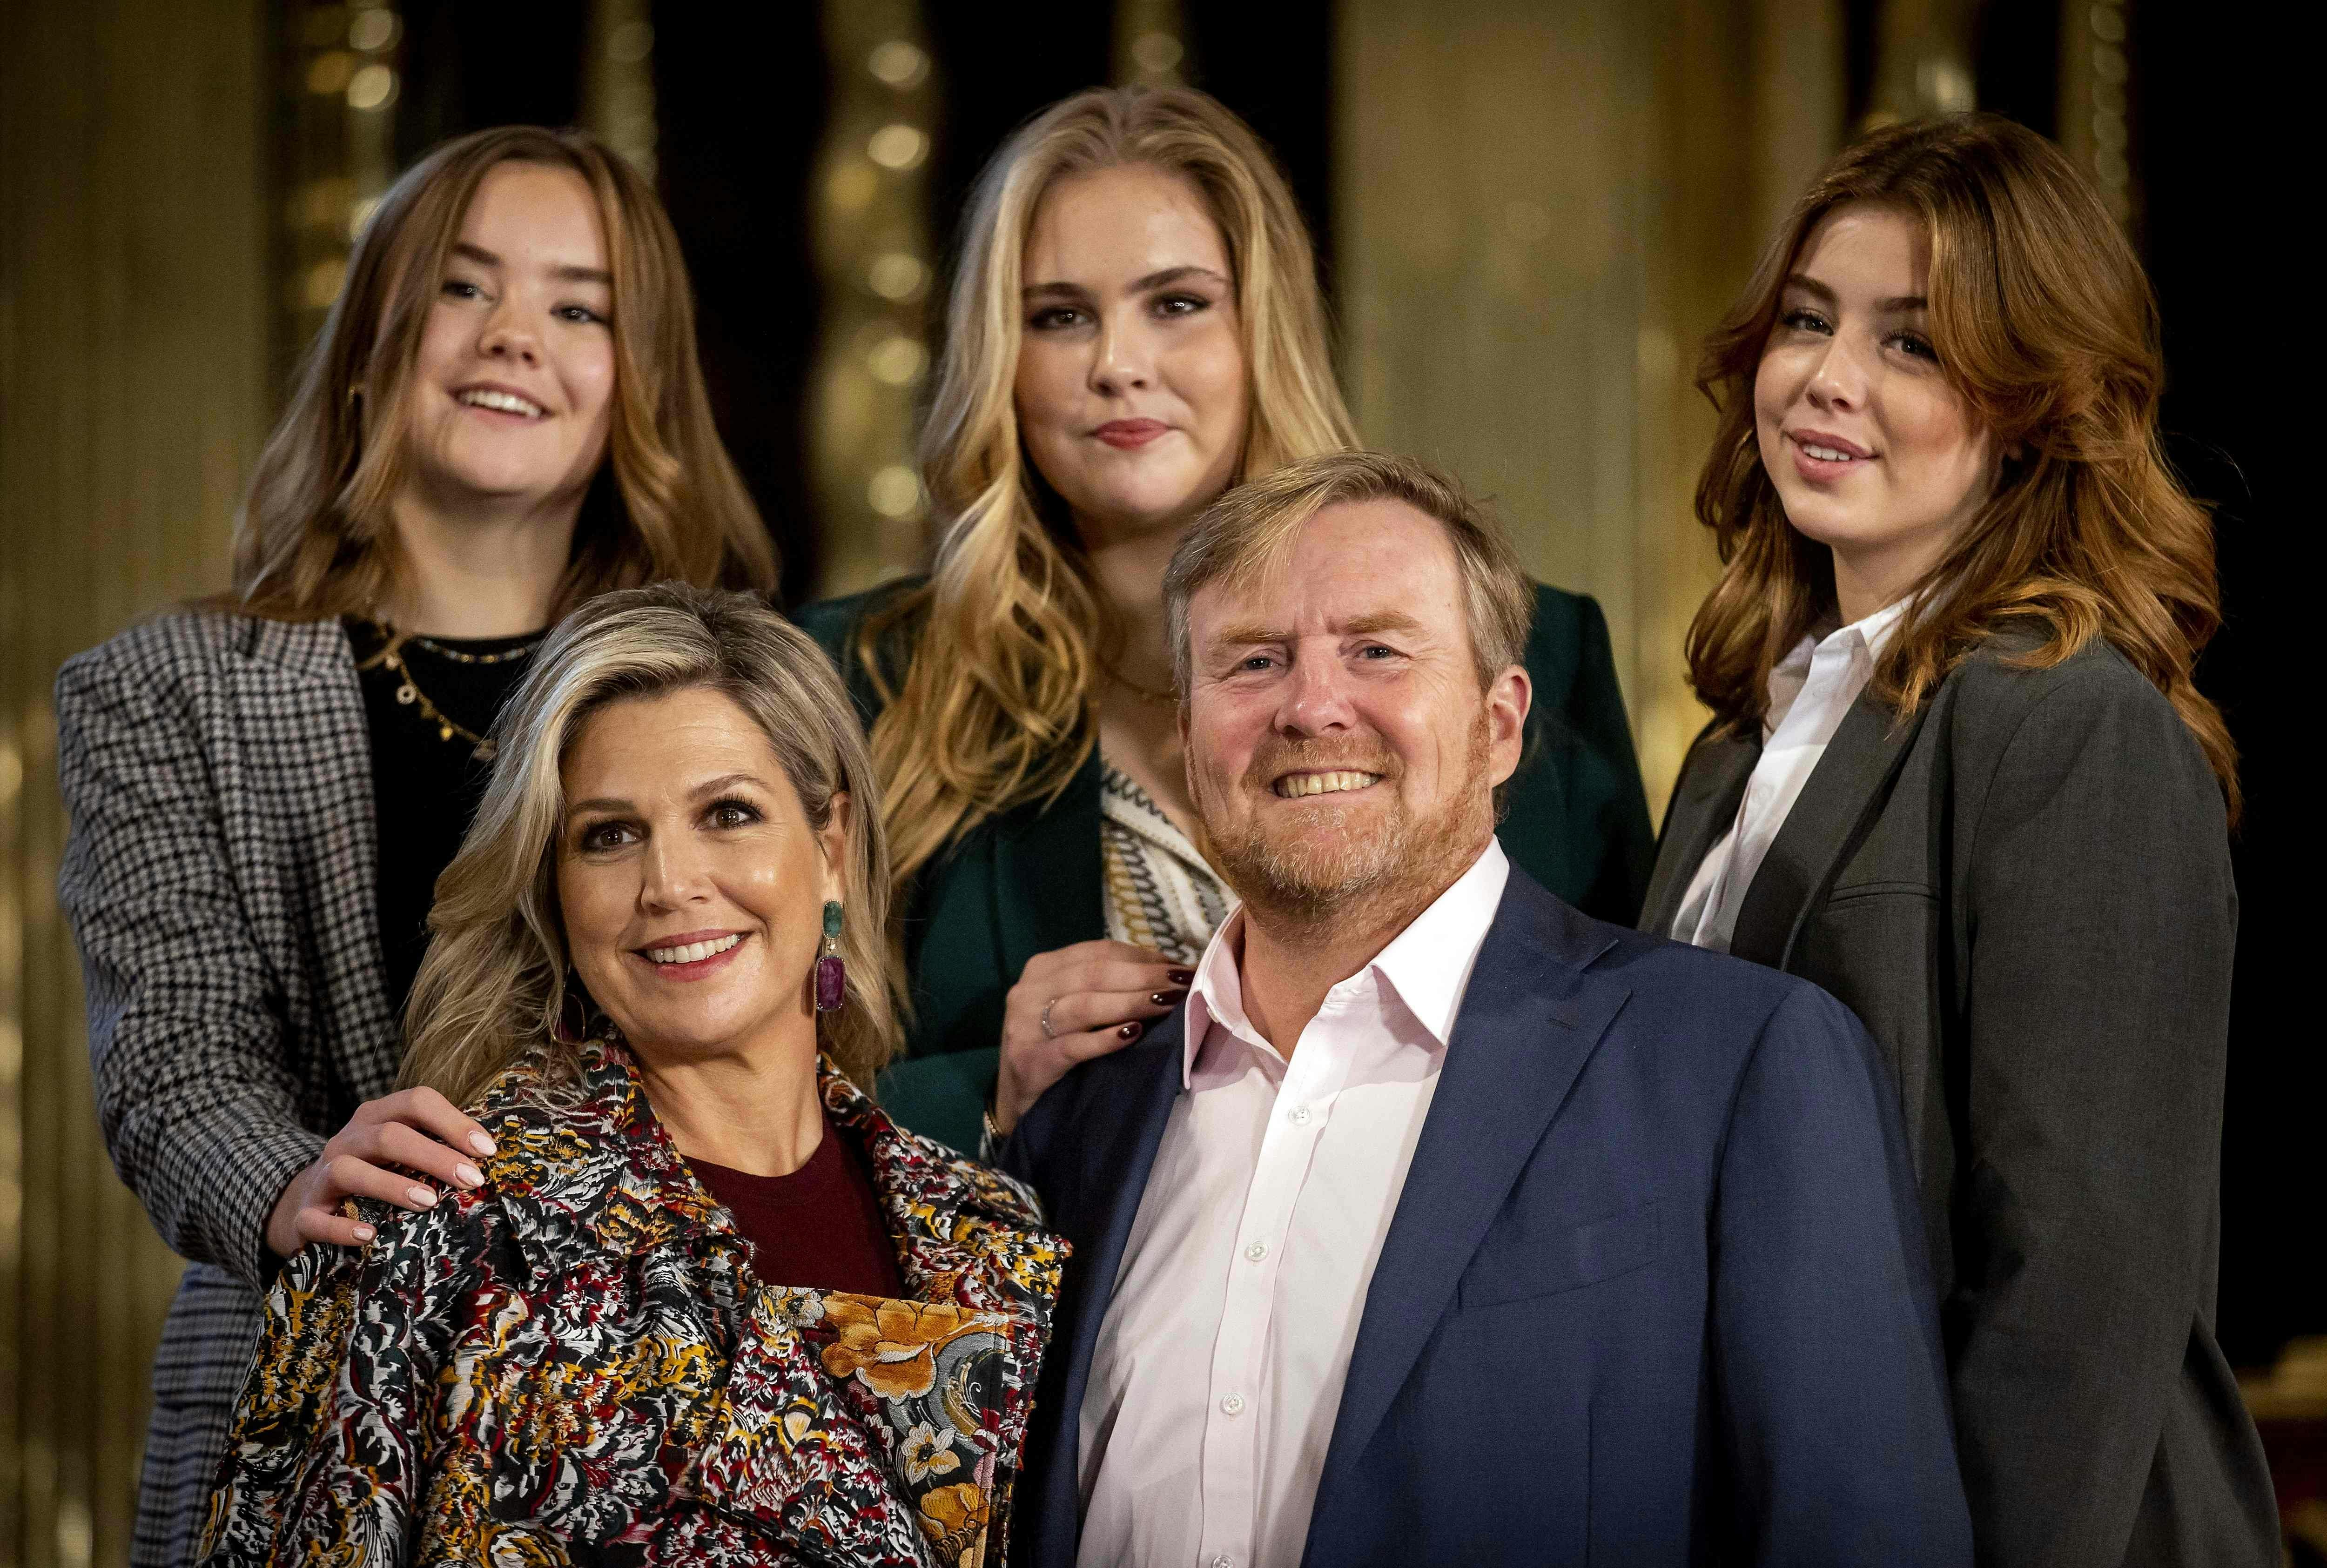 Dutch King Willem-Alexander (2nd R) and Queen Maxima (2nd L) pose with Princesses Ariane (L), Alexia (R) and Amalia (C) during the photo session of the royal family at the Nieuwe Kerk in Amsterdam, on November 4, 2022. (Photo by Koen van Weel / ANP / AFP) / Netherlands OUT